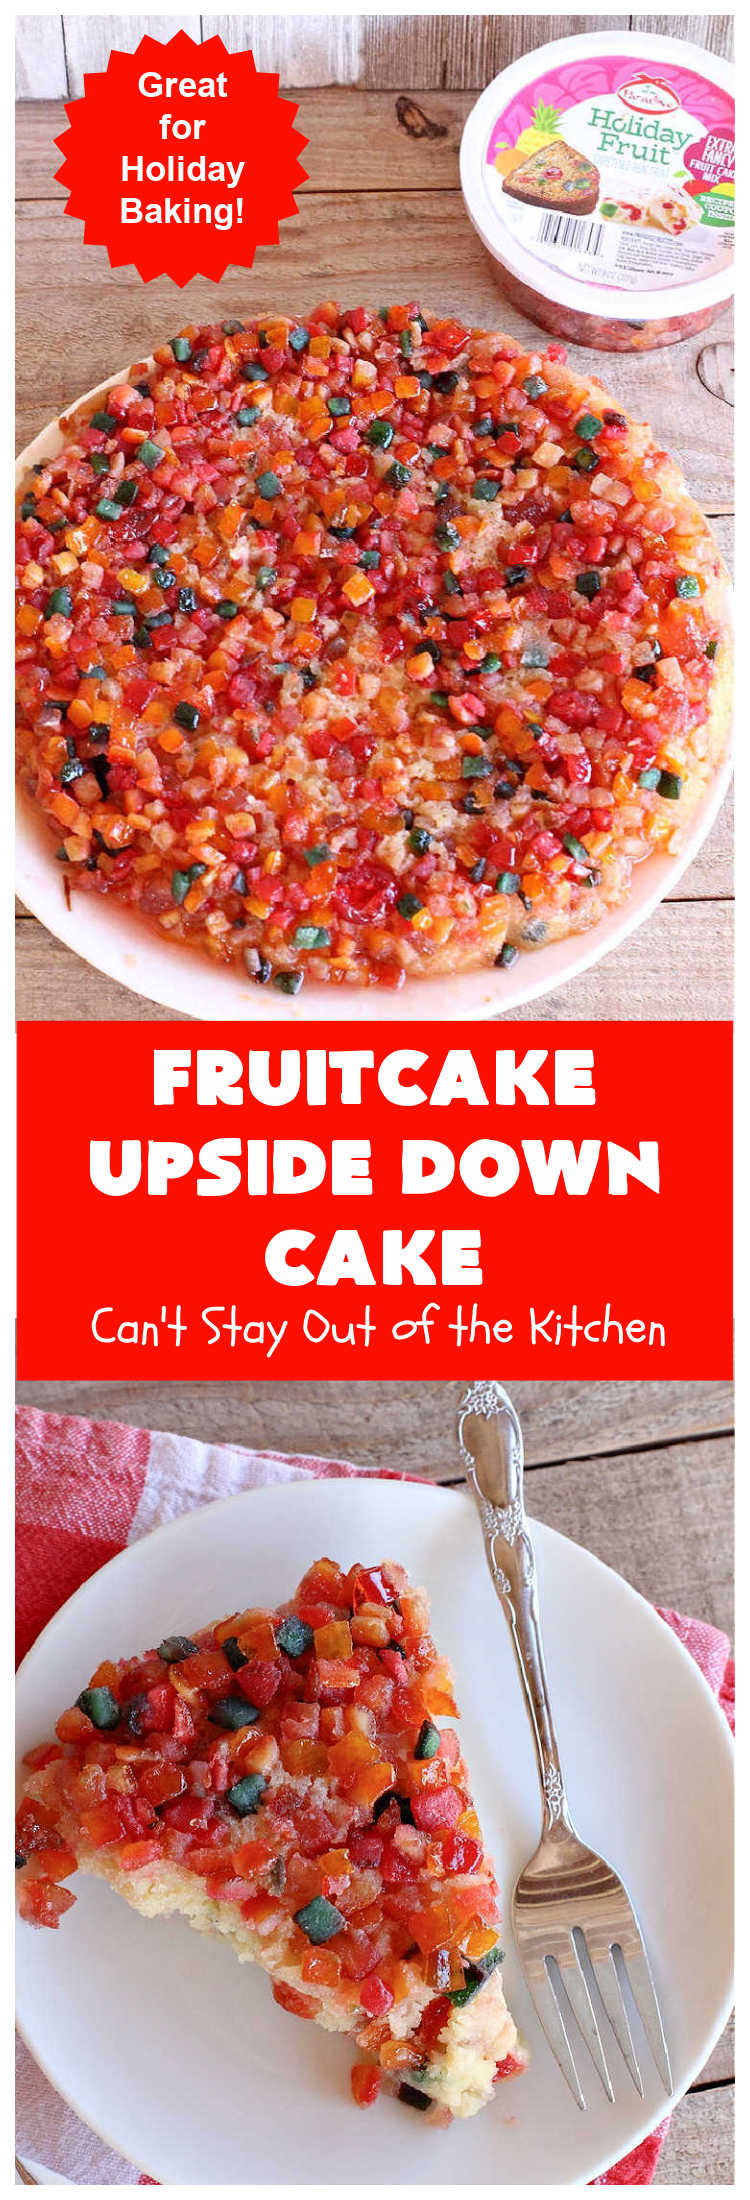 Fruitcake Upside Down Cake | Can't Stay Out of the Kitchen